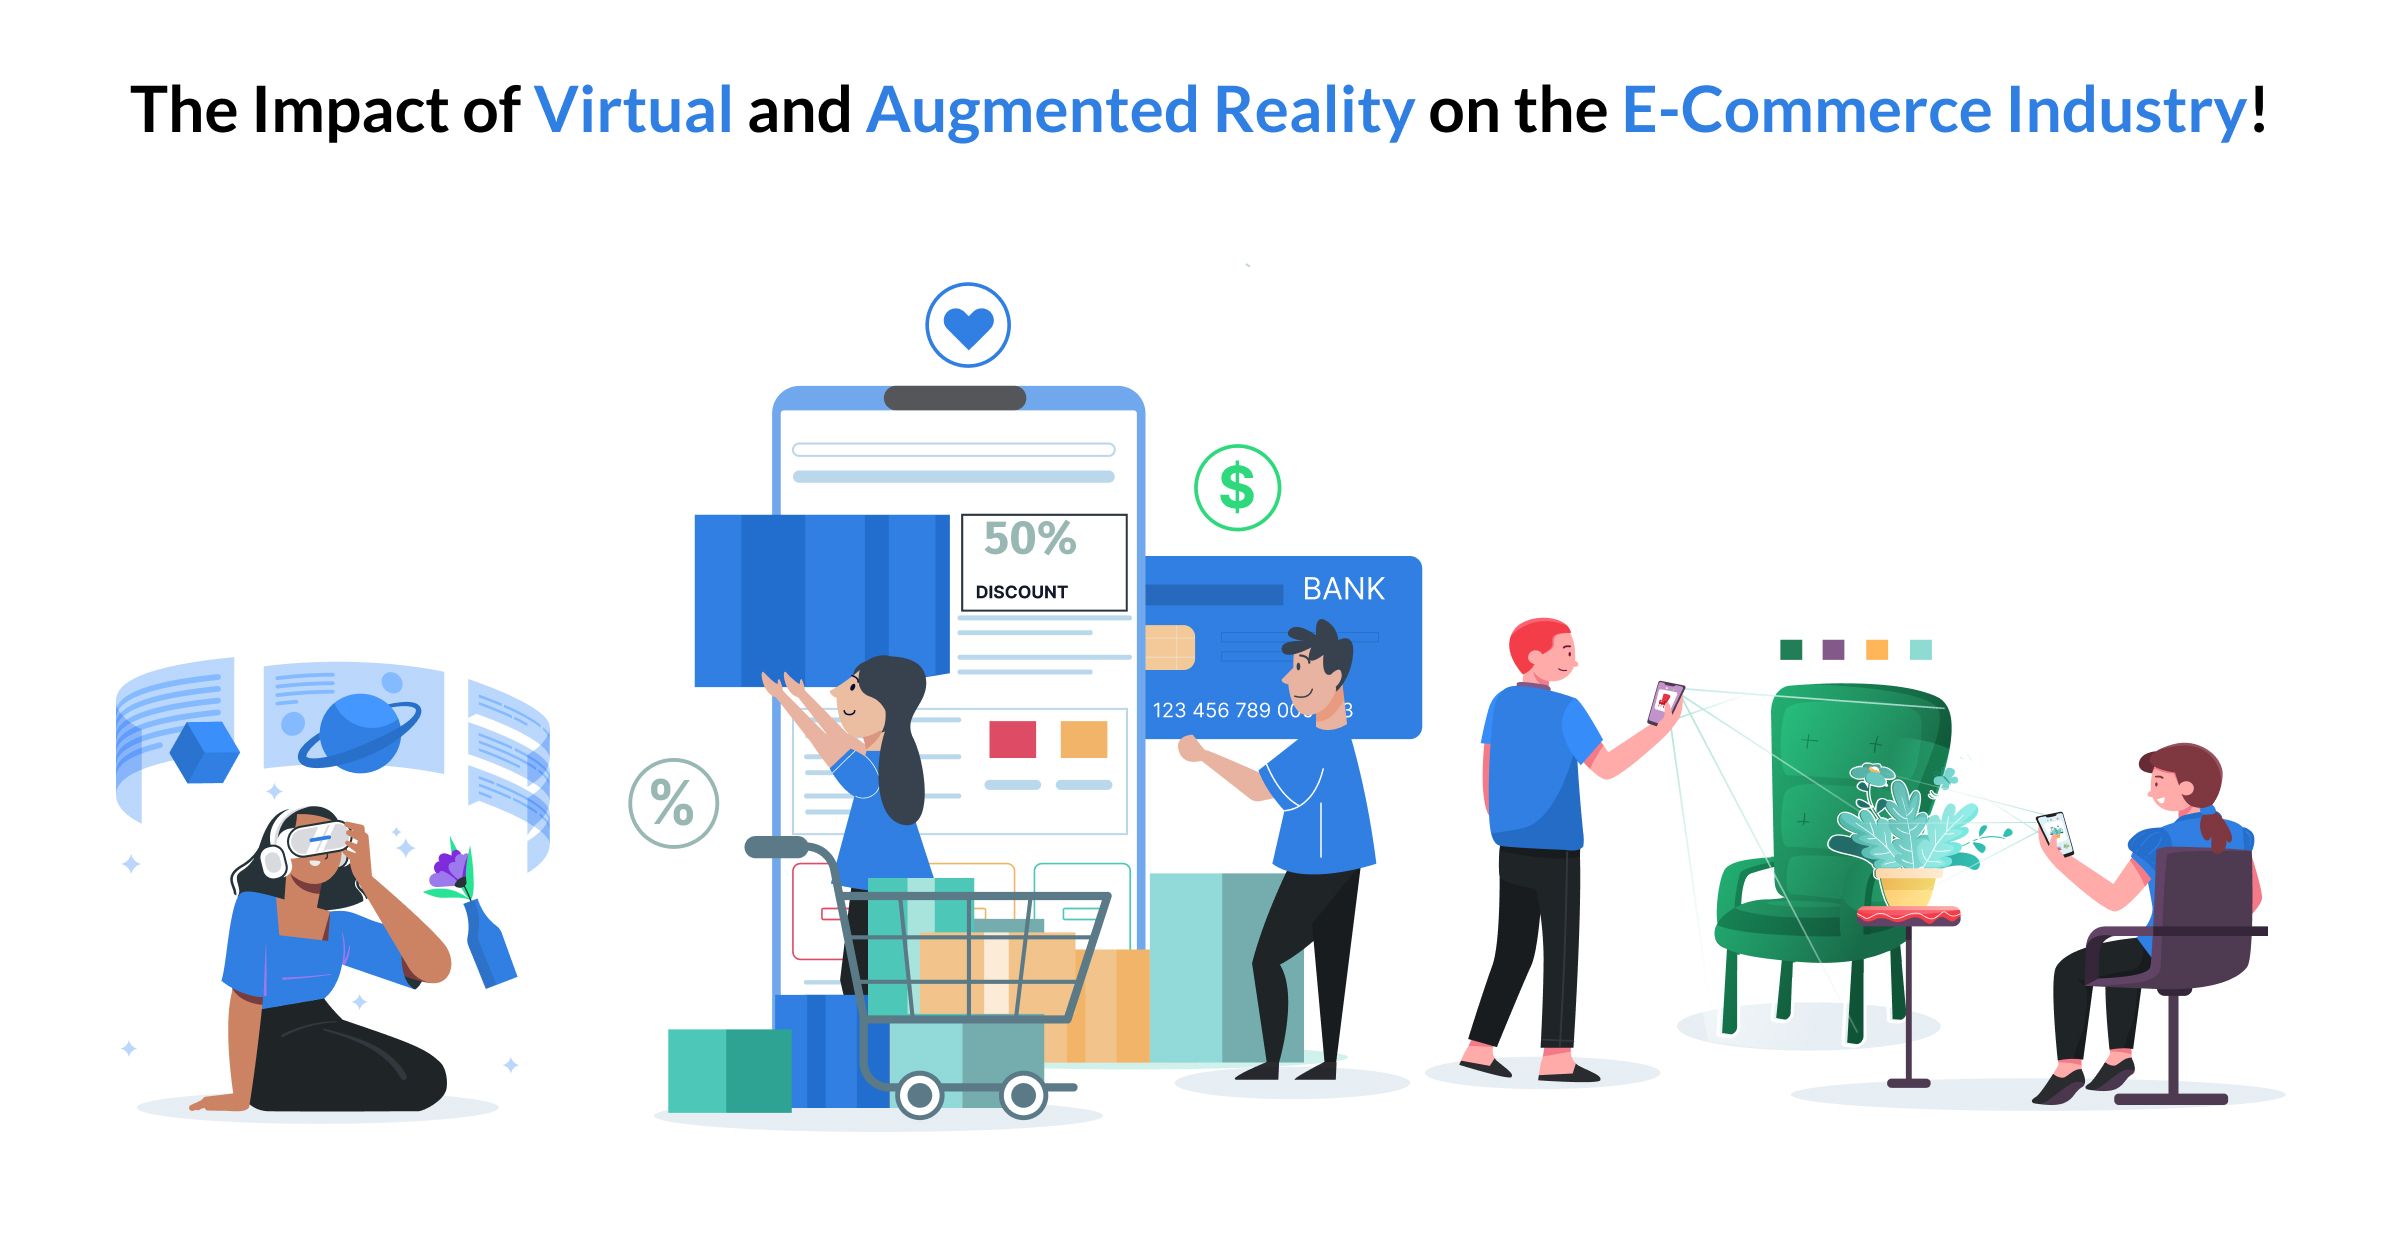 The impact of Virtual and Augmented Reality on the E-Commerce Industry!